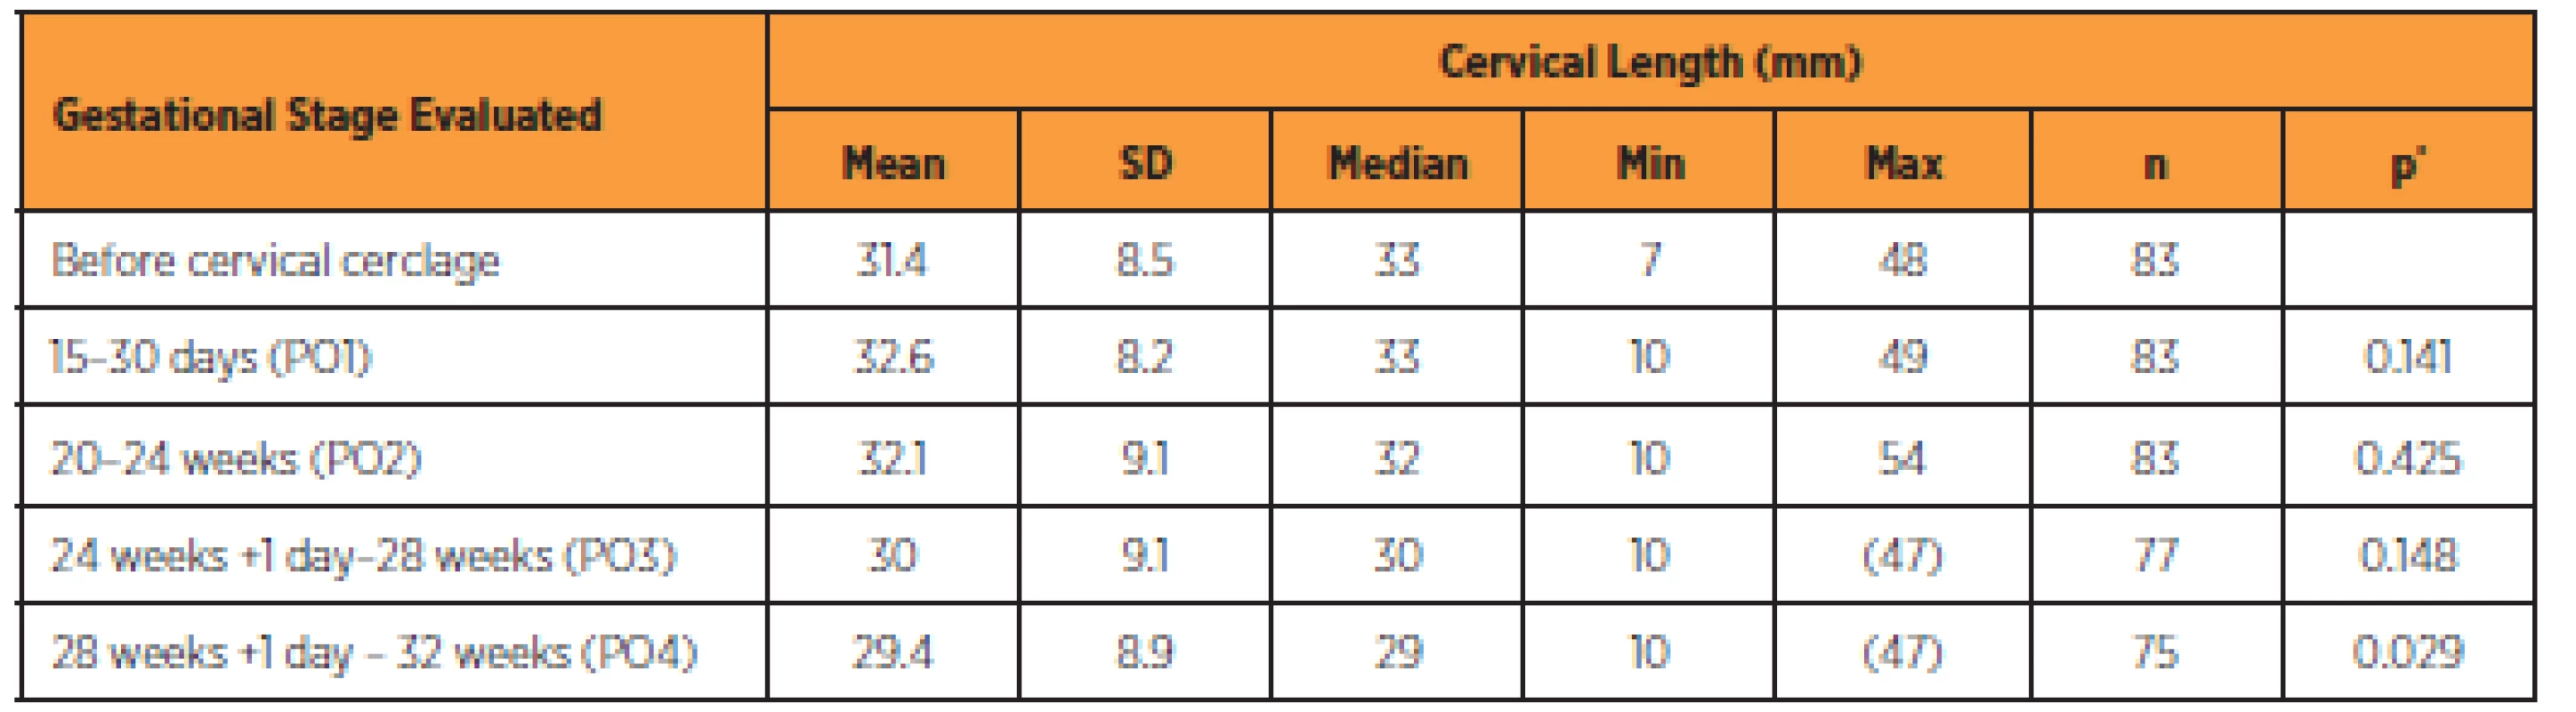 Comparison between cervical lengths at different stages before and after cervical cerclage